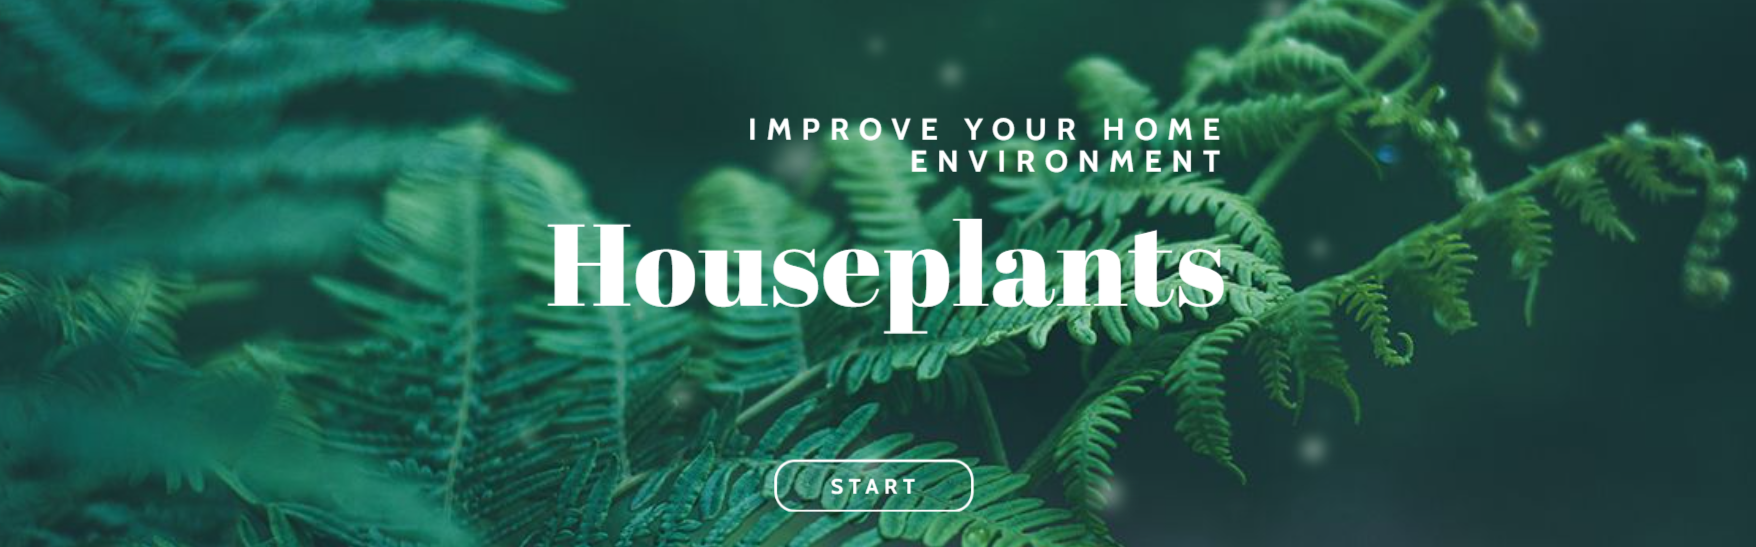 Improve Your Home Environment with Houseplants